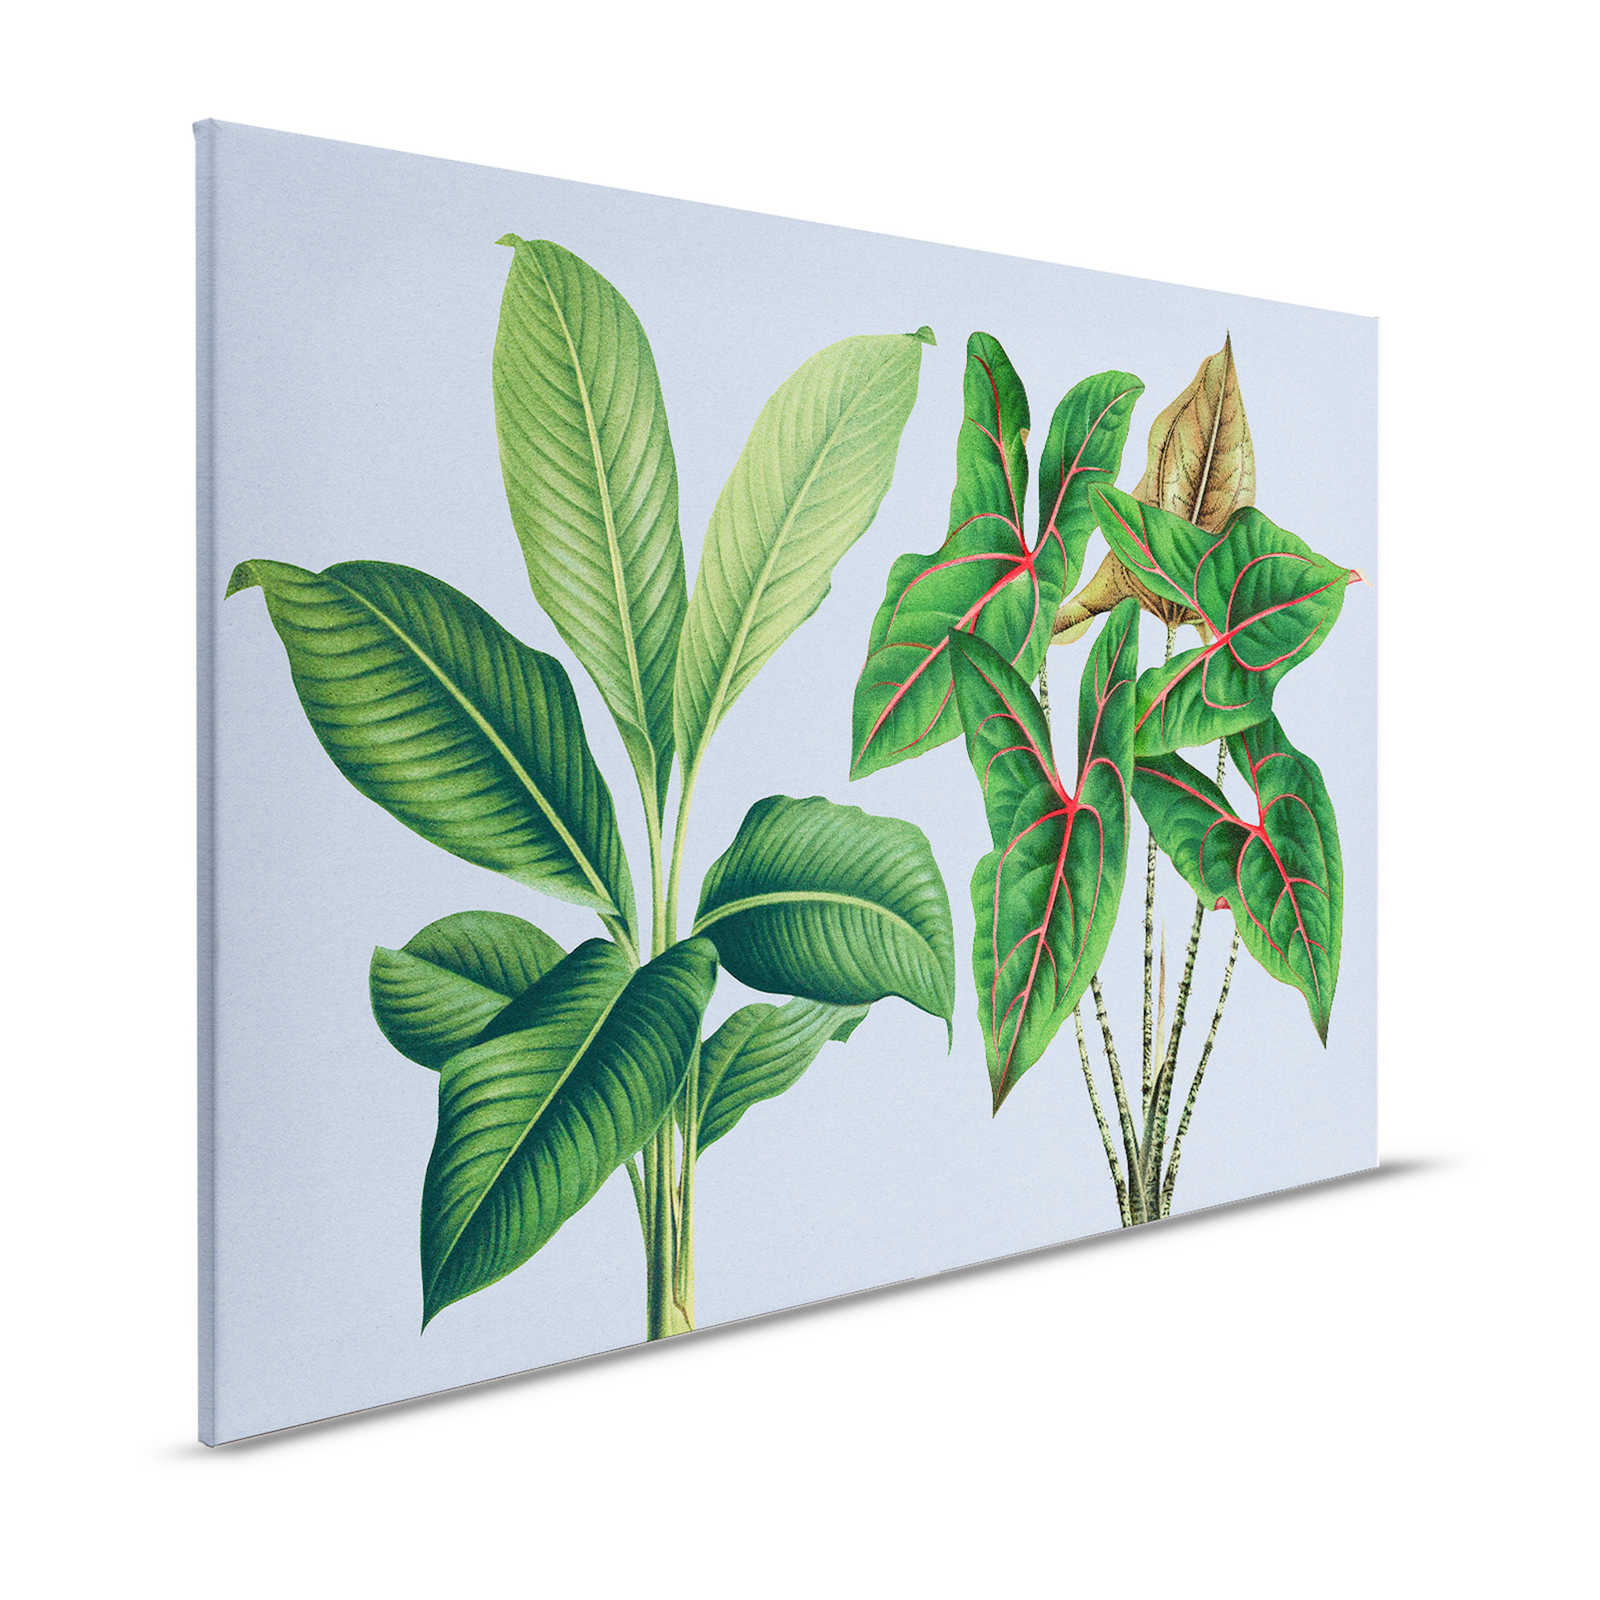 Leaf Garden 1 - Leaves Canvas painting Blue with tropical plants - 1.20 m x 0.80 m
